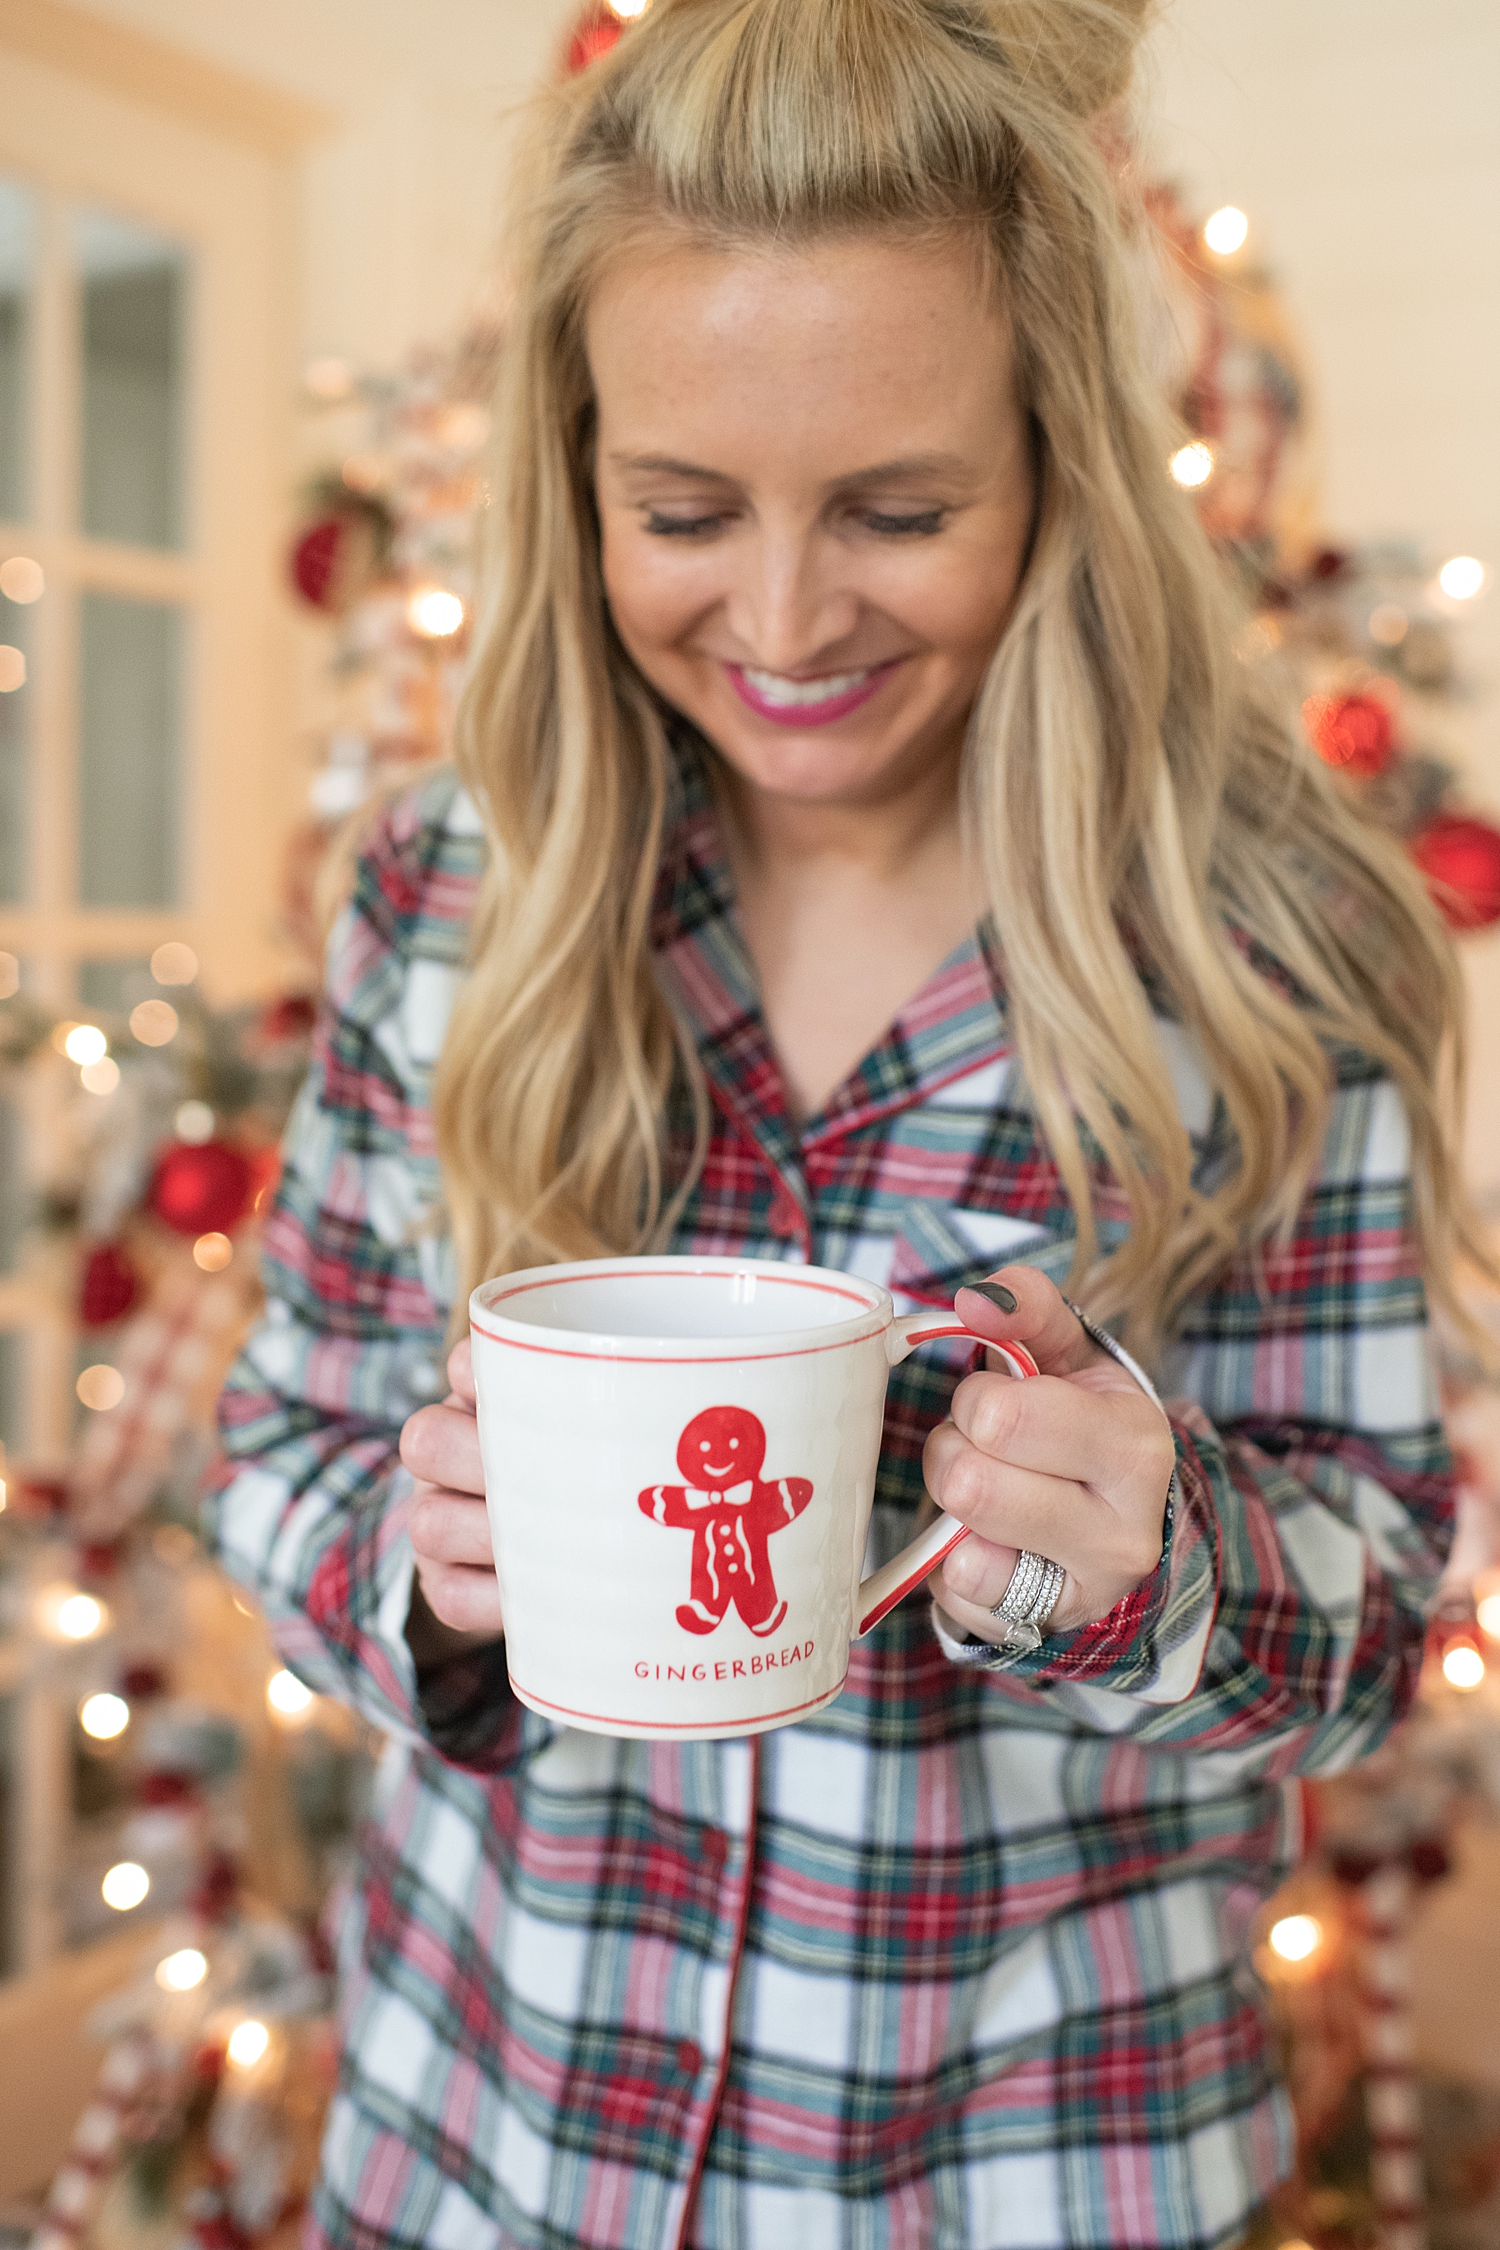 Holiday Pjs & Top Macy's Christmas Gifts featured by top Houston life and style blog, Fancy Ashley" image of a woman wearing plaid Holiday pjs and grey slippers available at Macy's